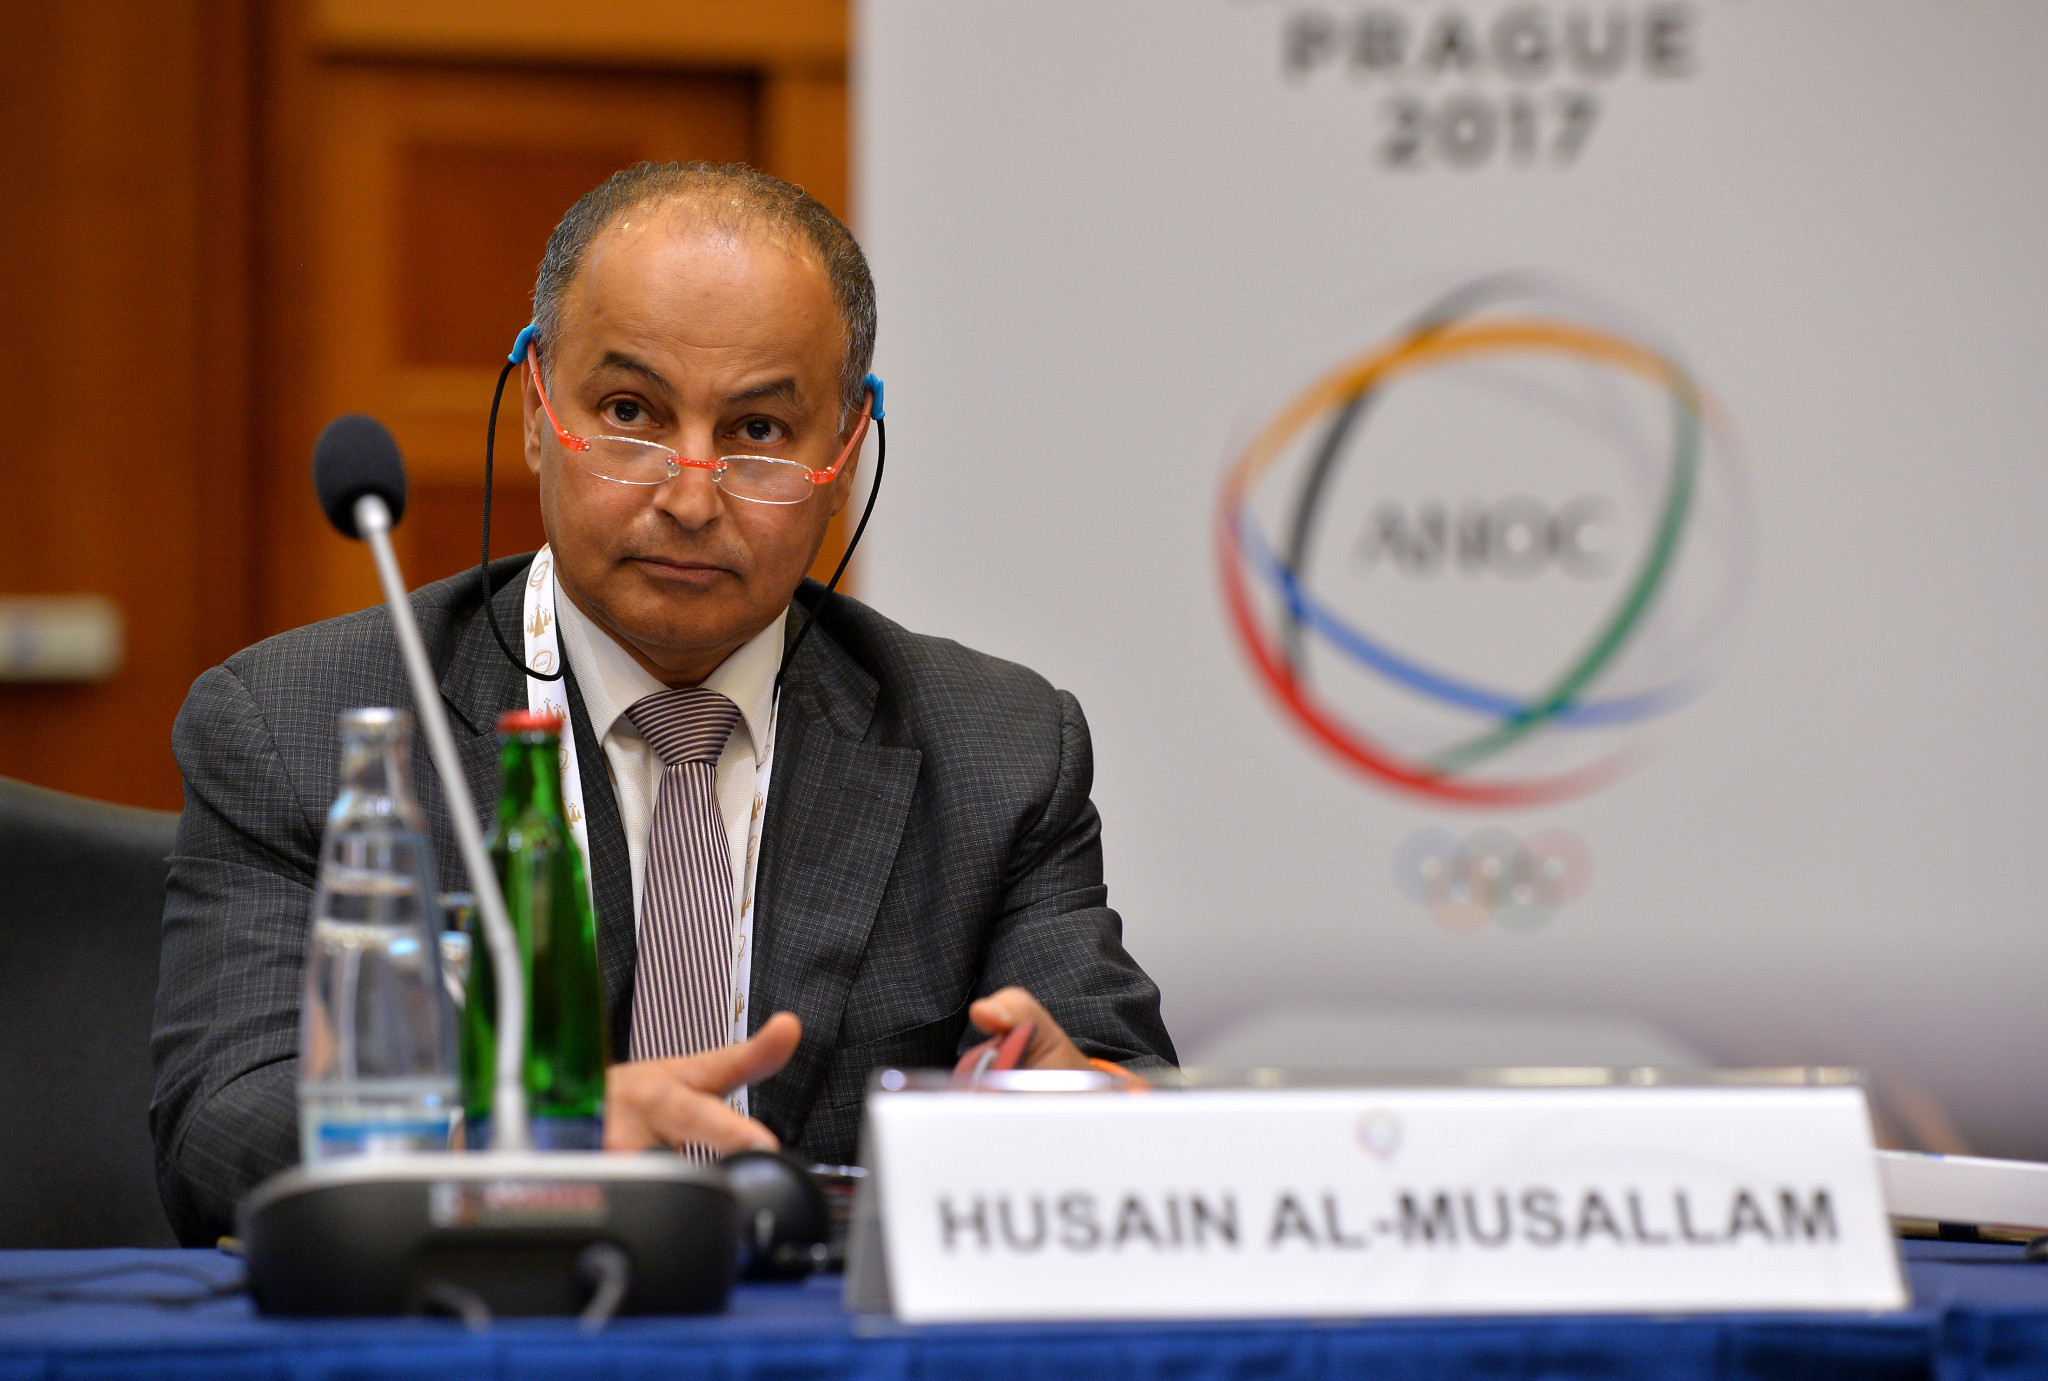 Al-Musallam set to be elected unopposed as FINA President at General Congress